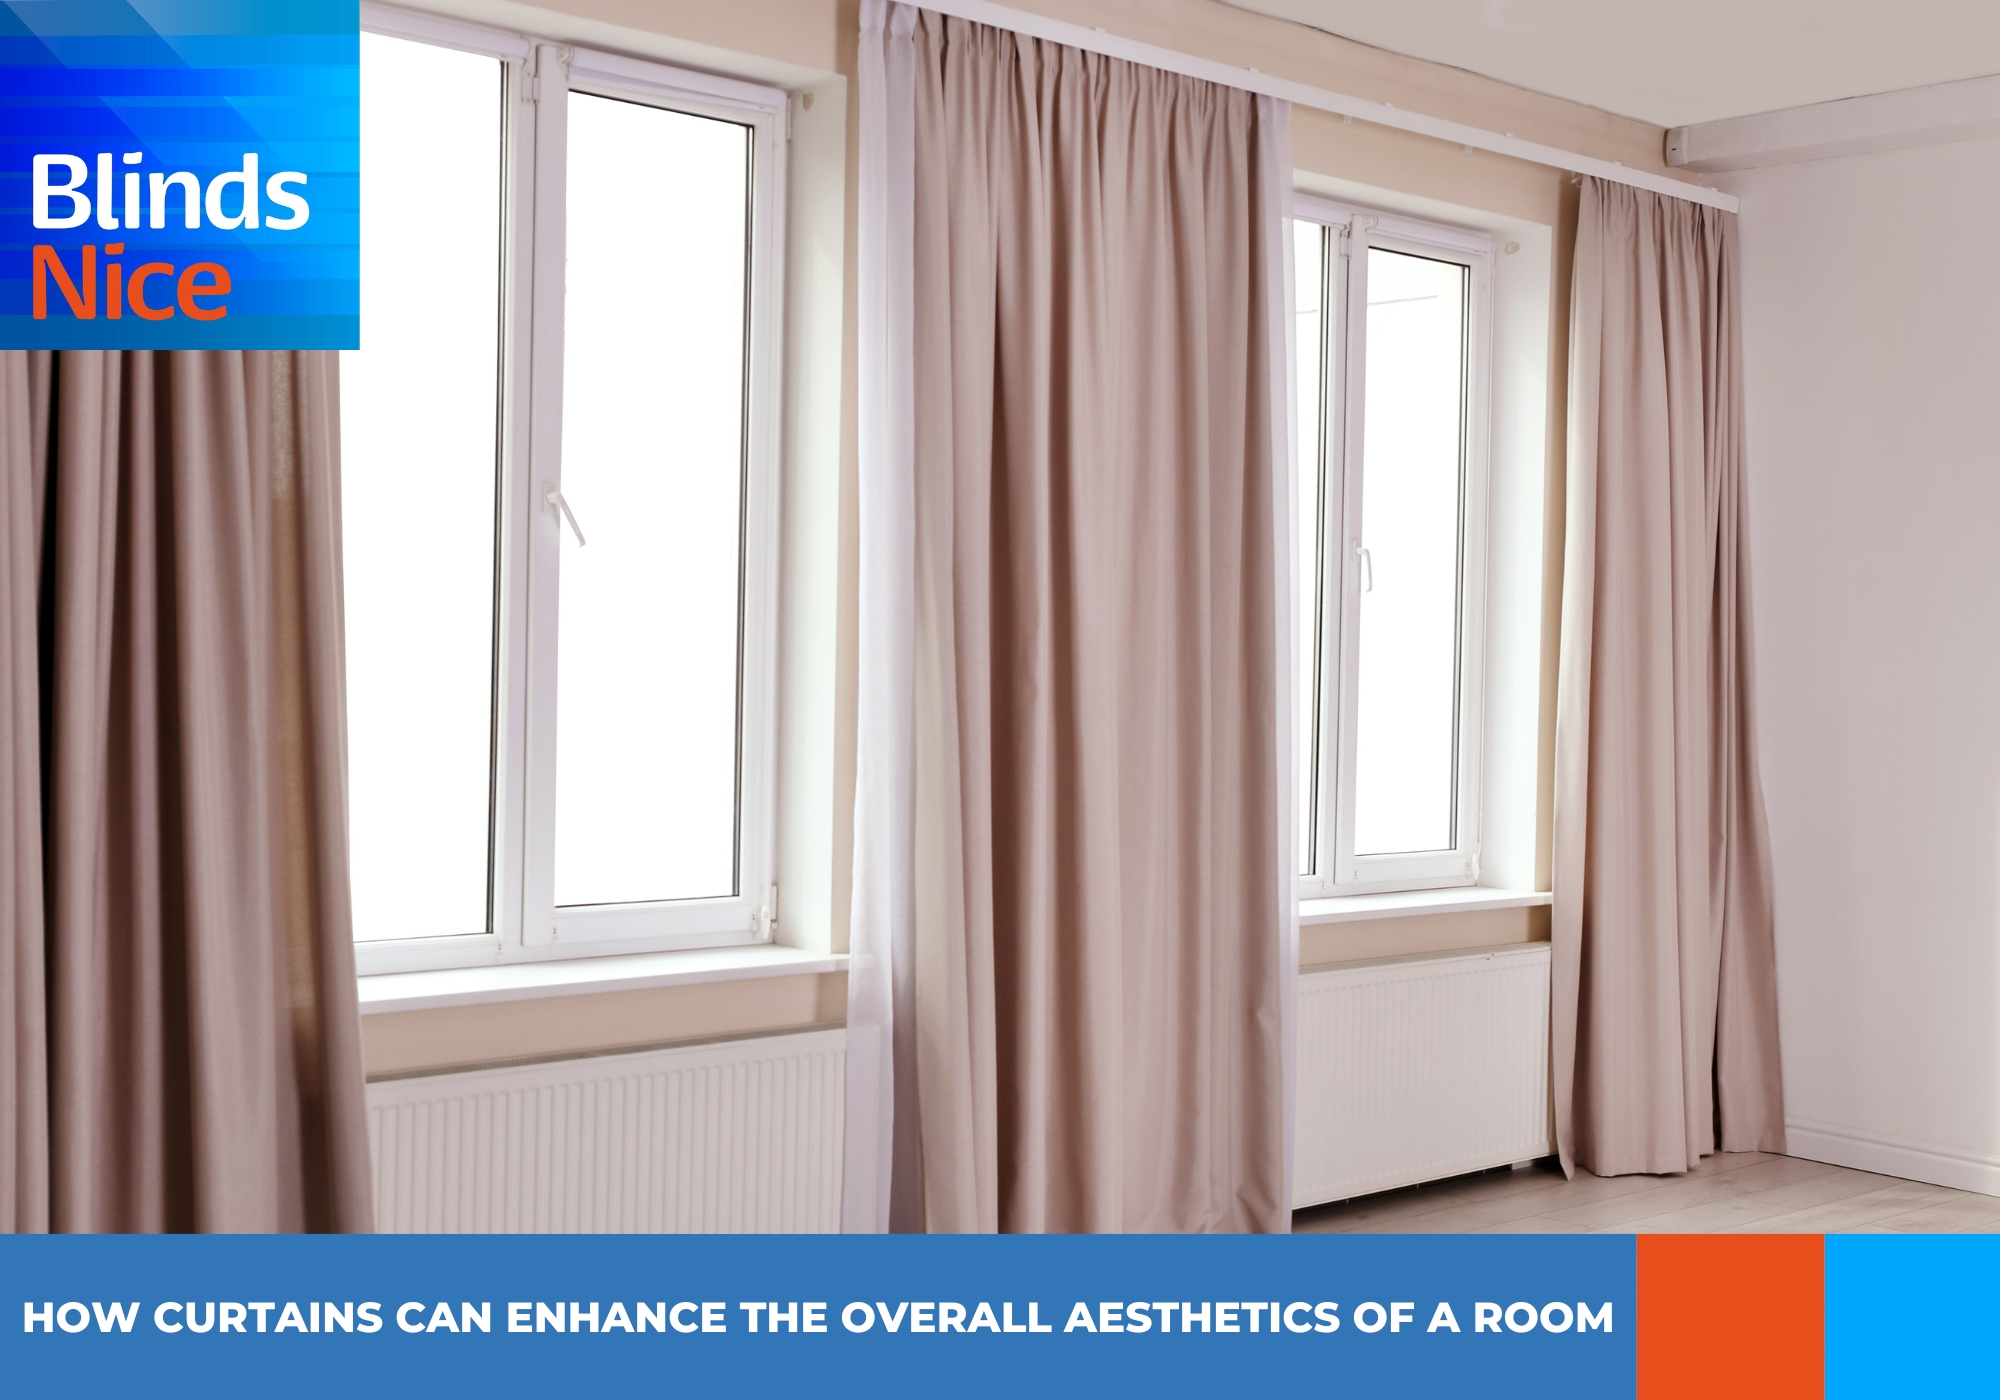 How Curtains can Enhance the Overall Aesthetics of a Room